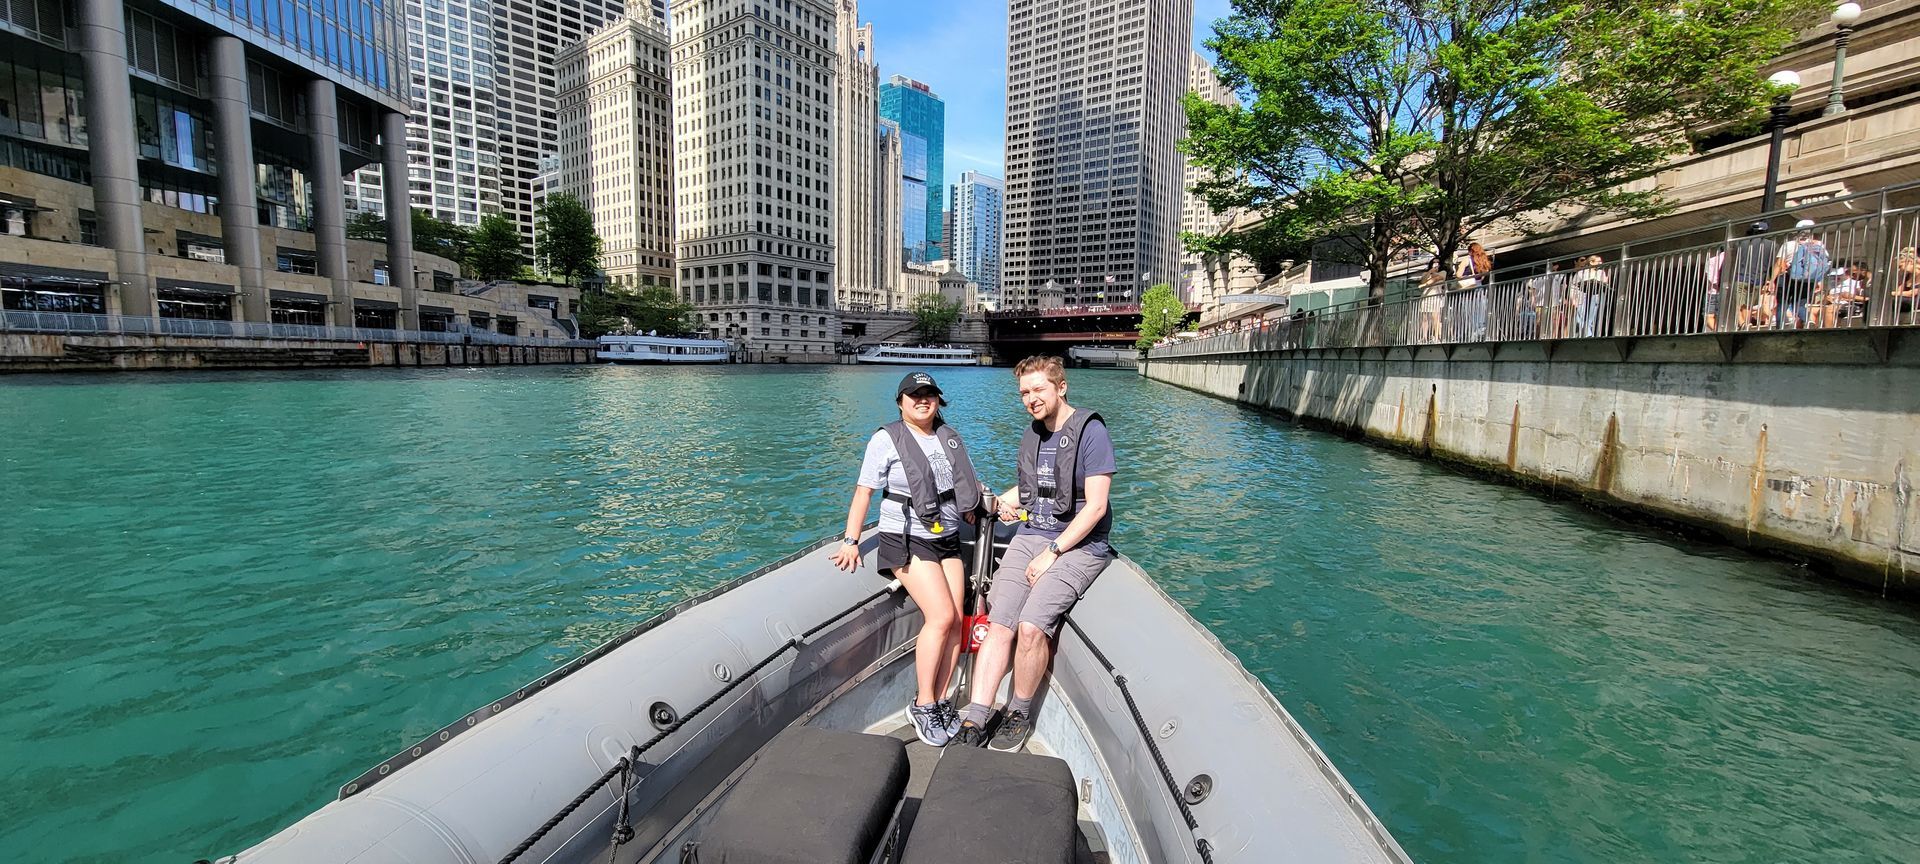 chicago river boat tours today